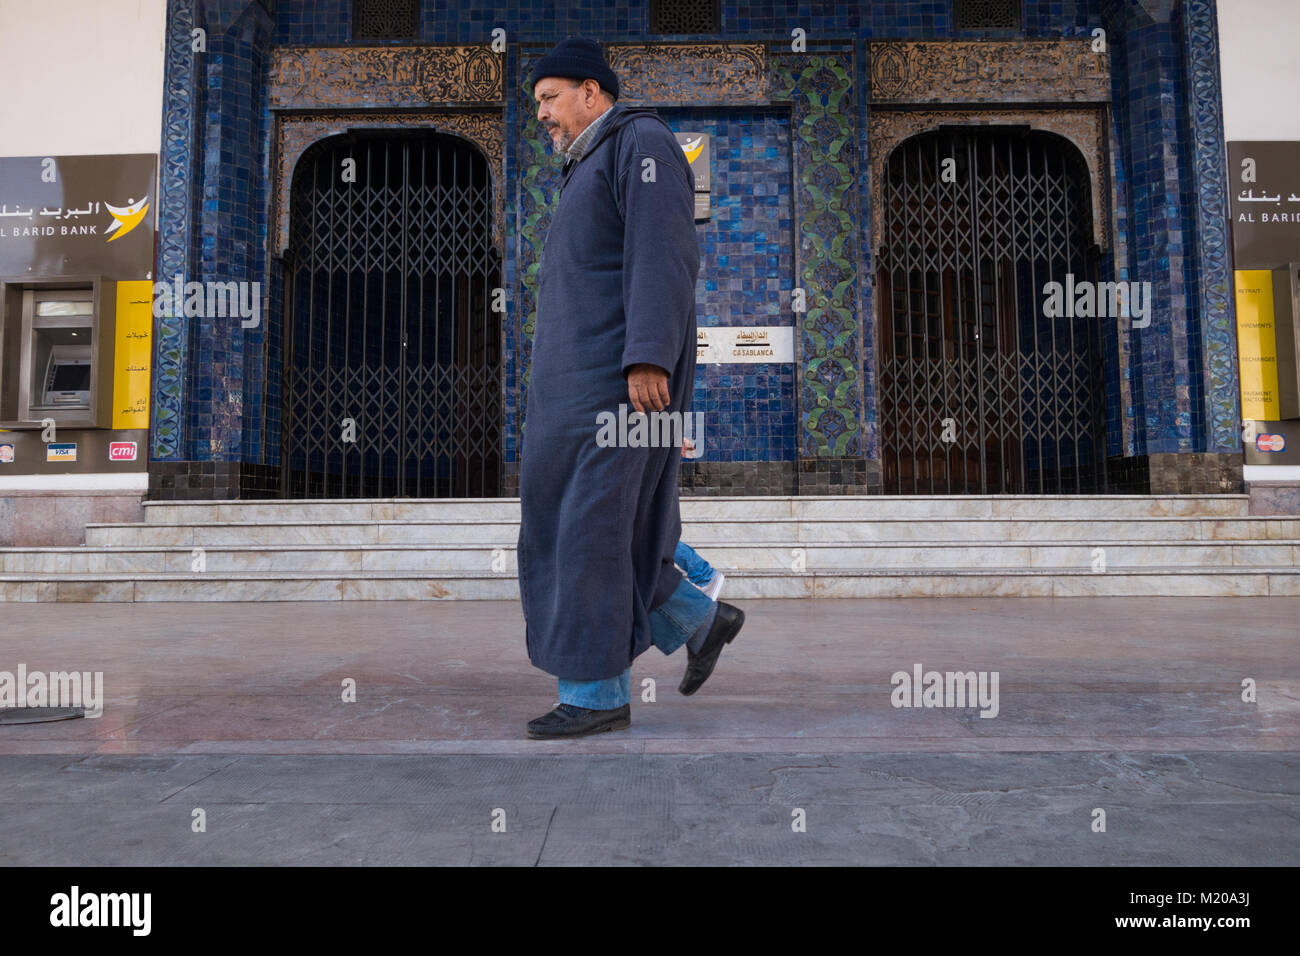 Casablanca, Morocco - 14 January 2018 : local old man walking near the post office wearing a traditional outfit Stock Photo